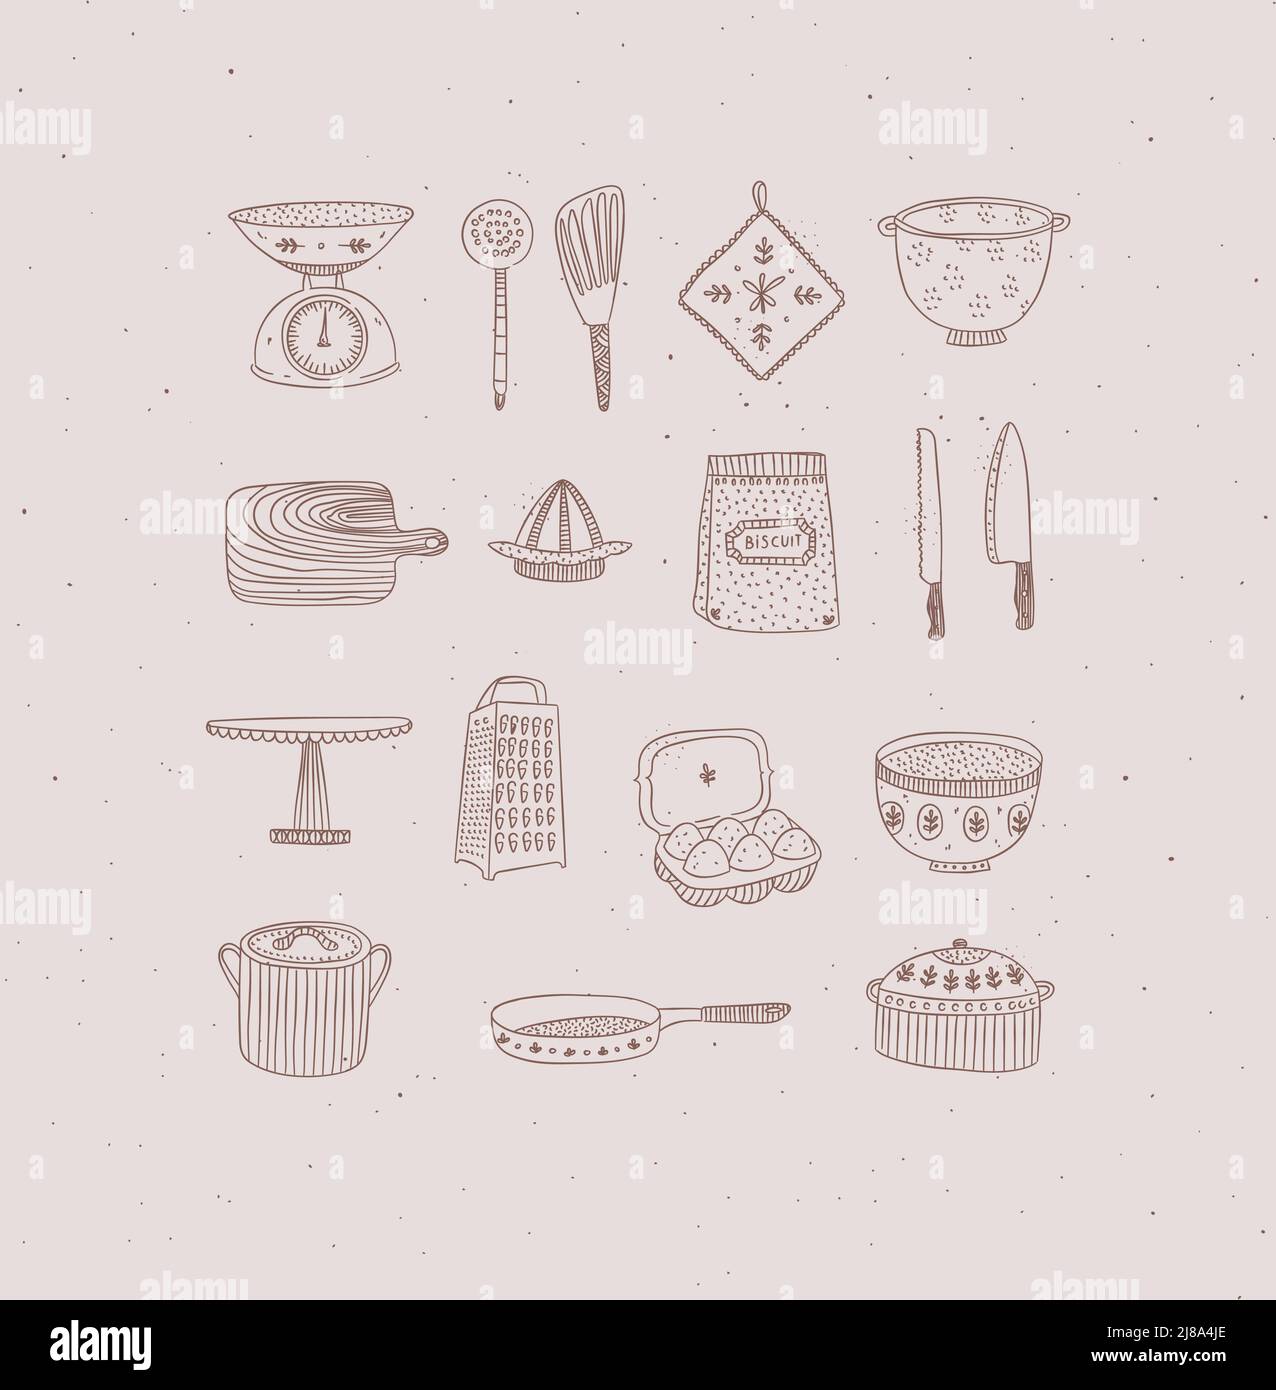 Set of kitchen tools and cooking icons drawing in handmade graphic primitive casual style on peach background. Stock Vector